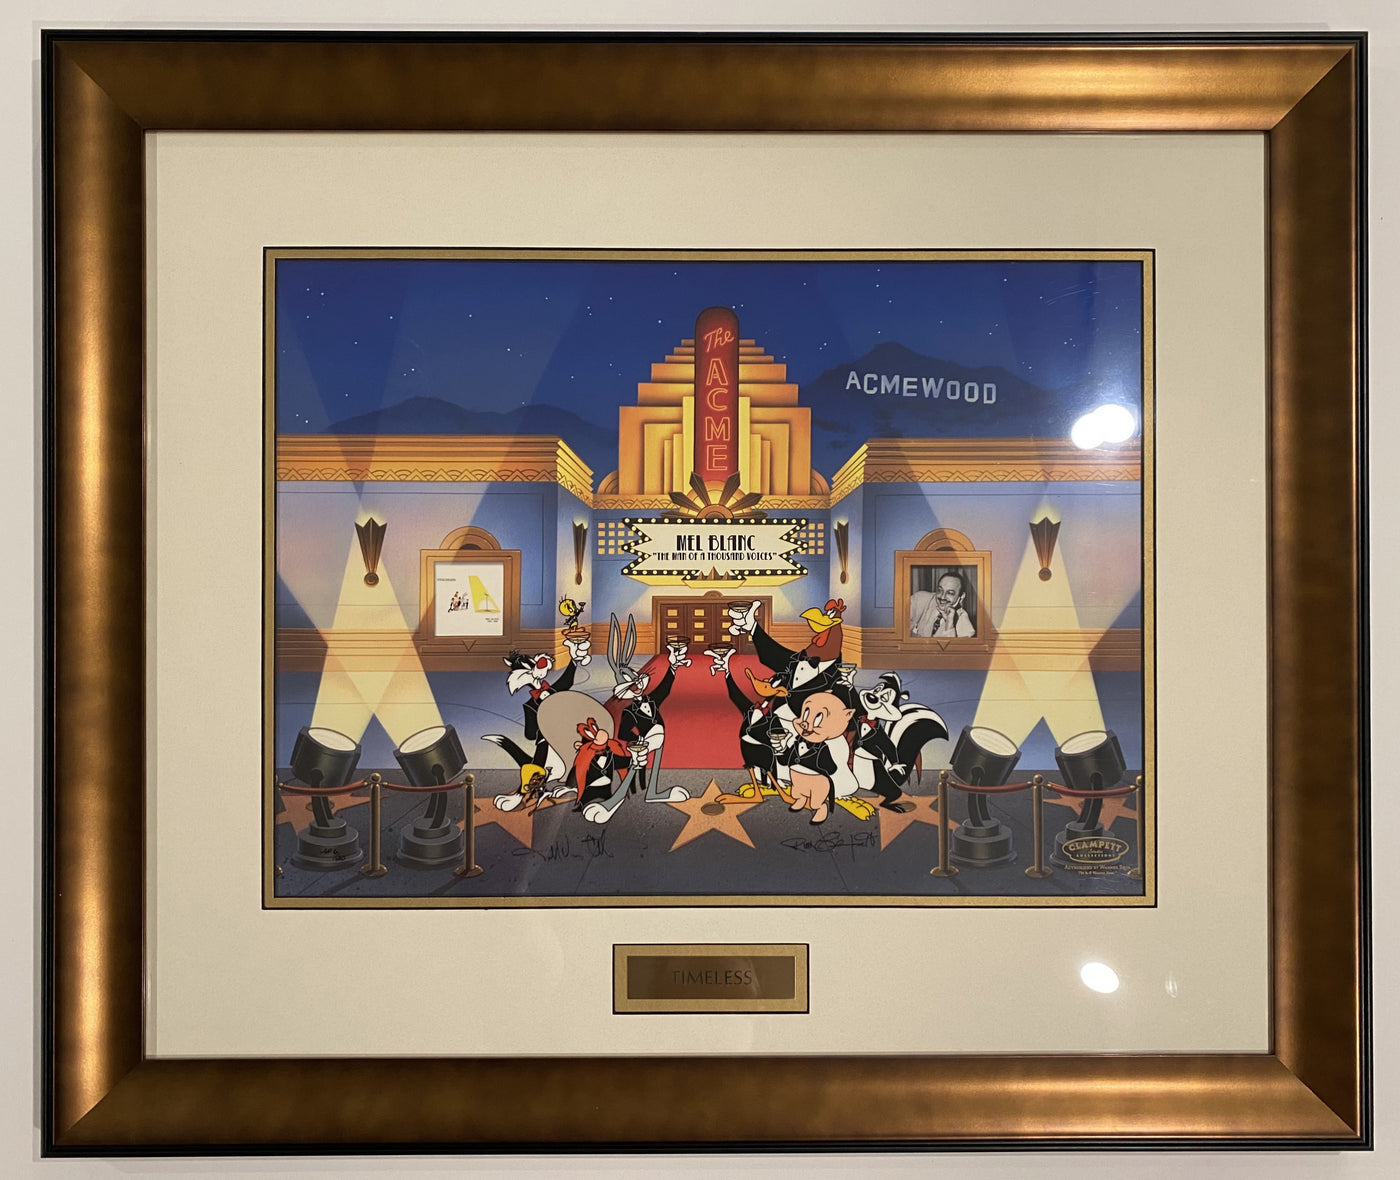 Warner Brothers Limited Edition Cel "Timeless..." Signed by Ruth Clampett and Darrell Van Citters